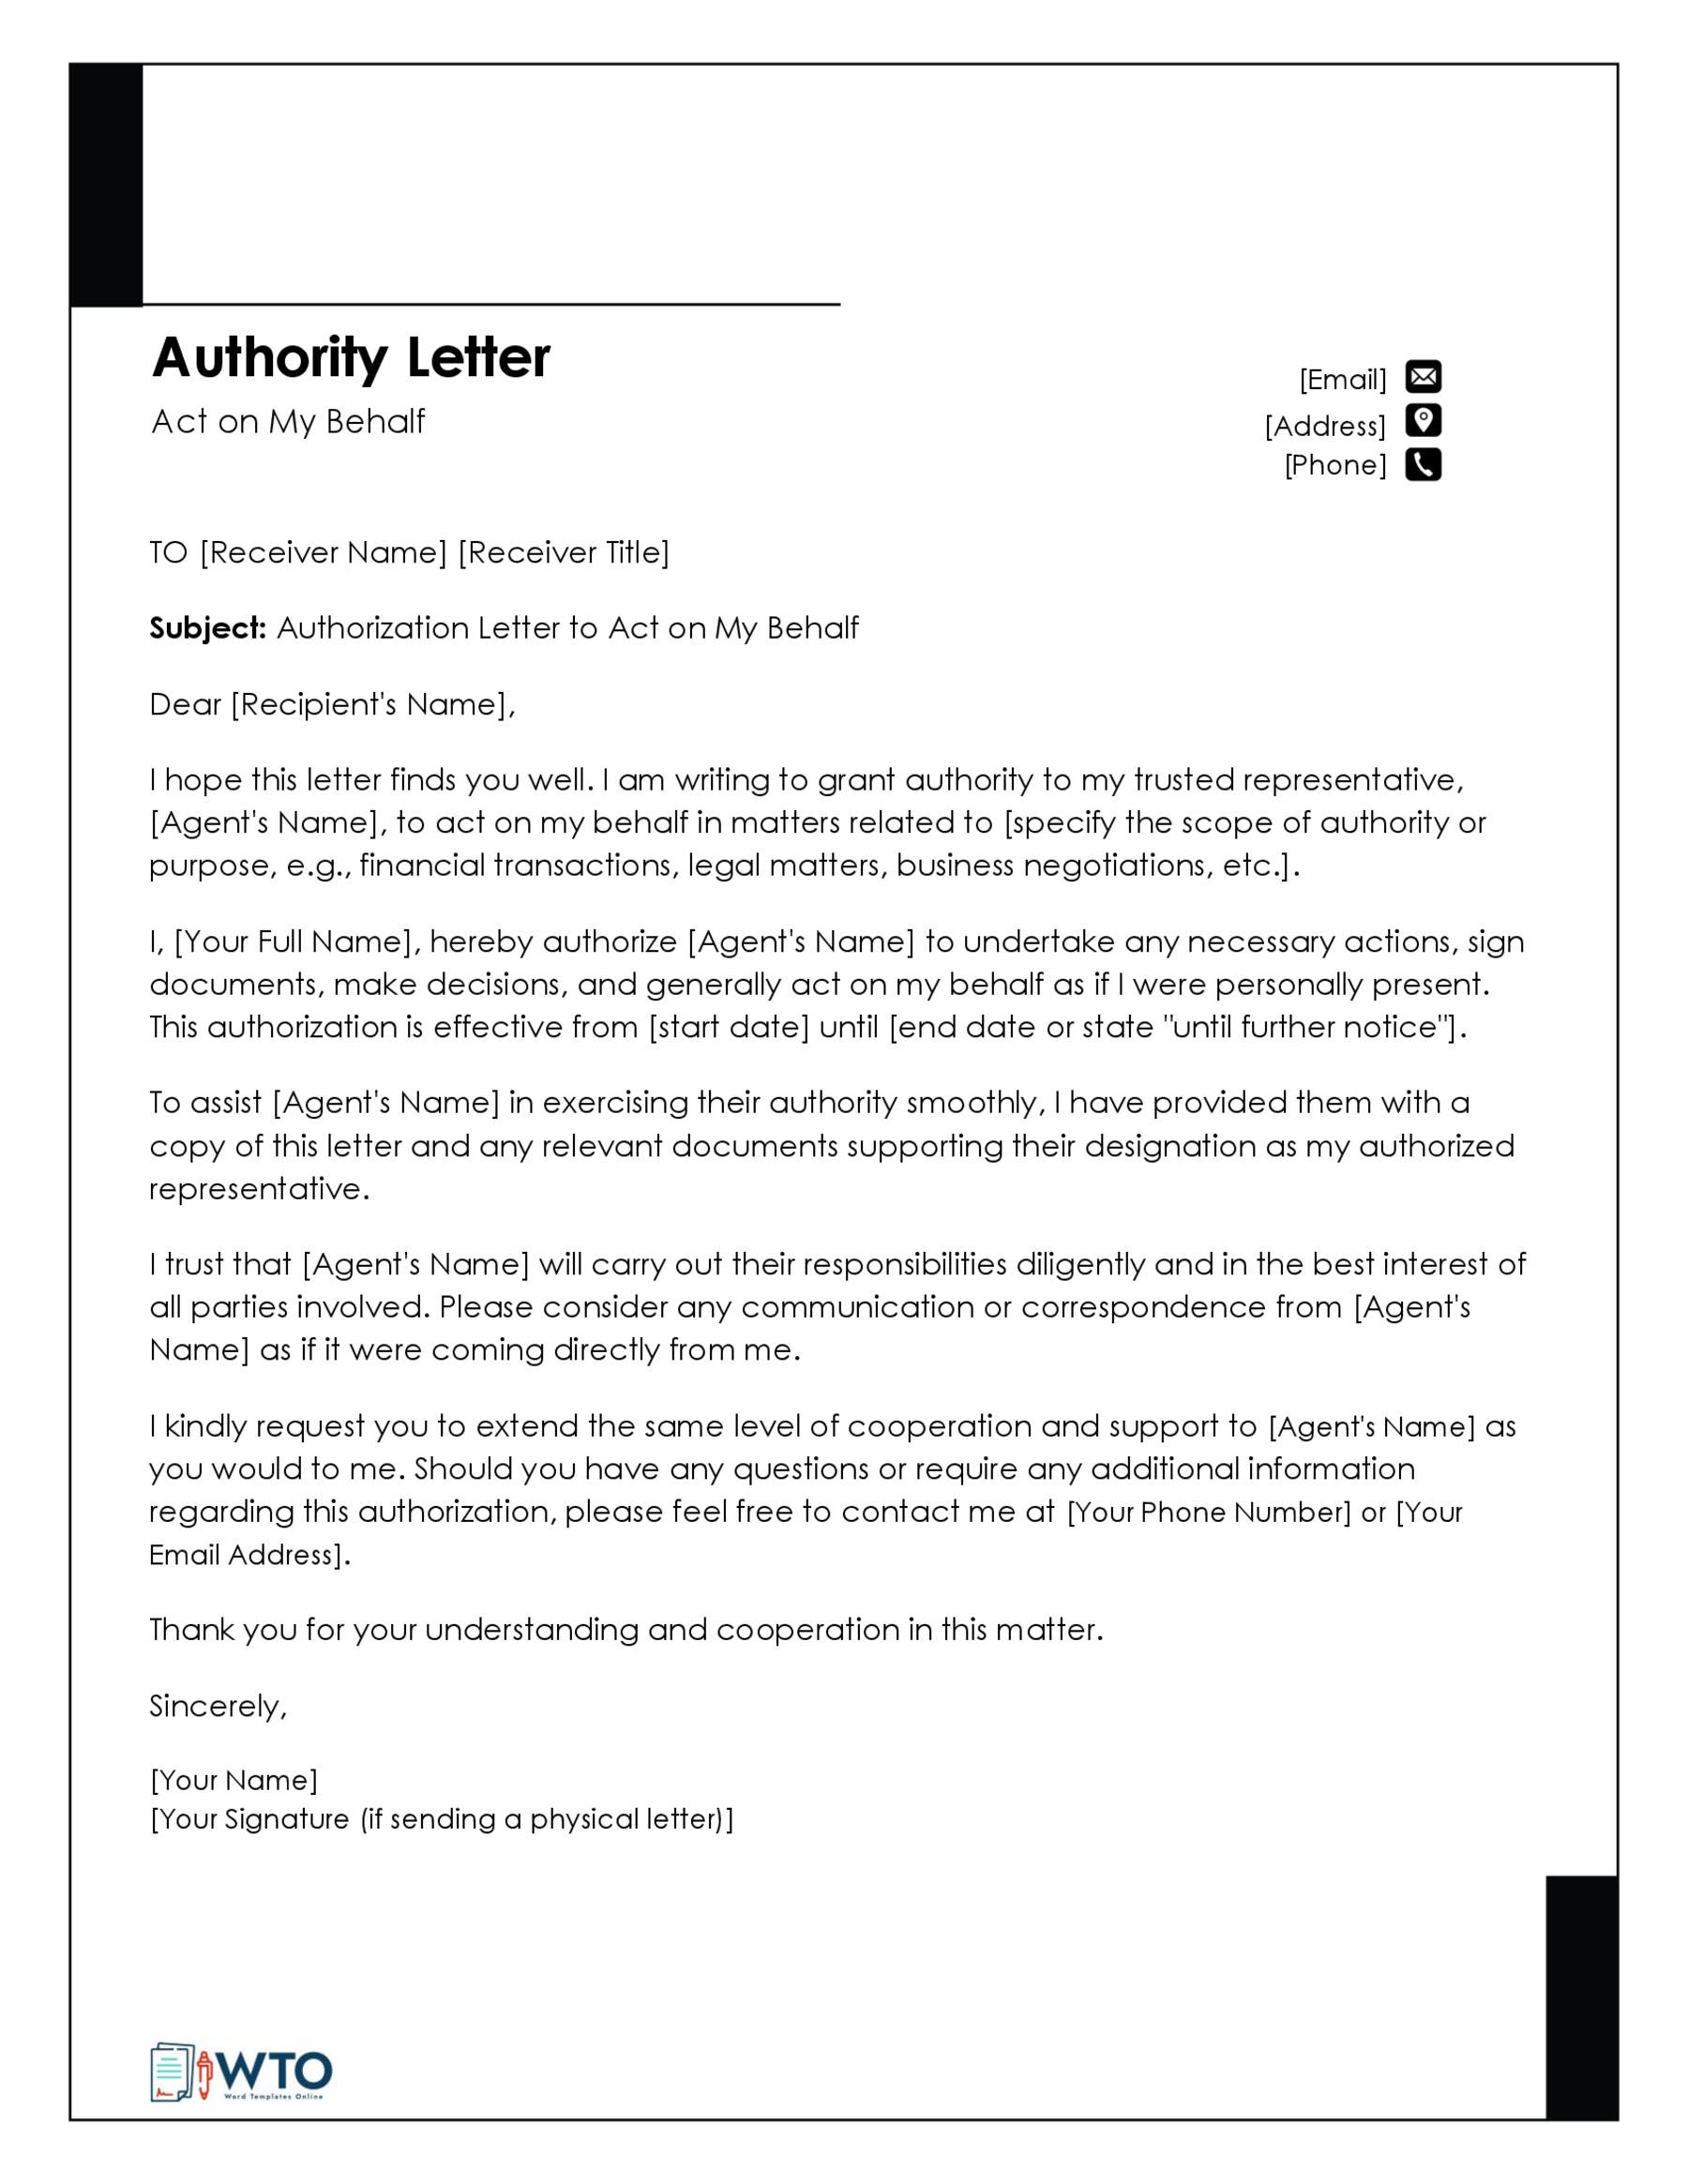 Free Editable Act on Behalf Authorization Letter Template 05 for Word Document